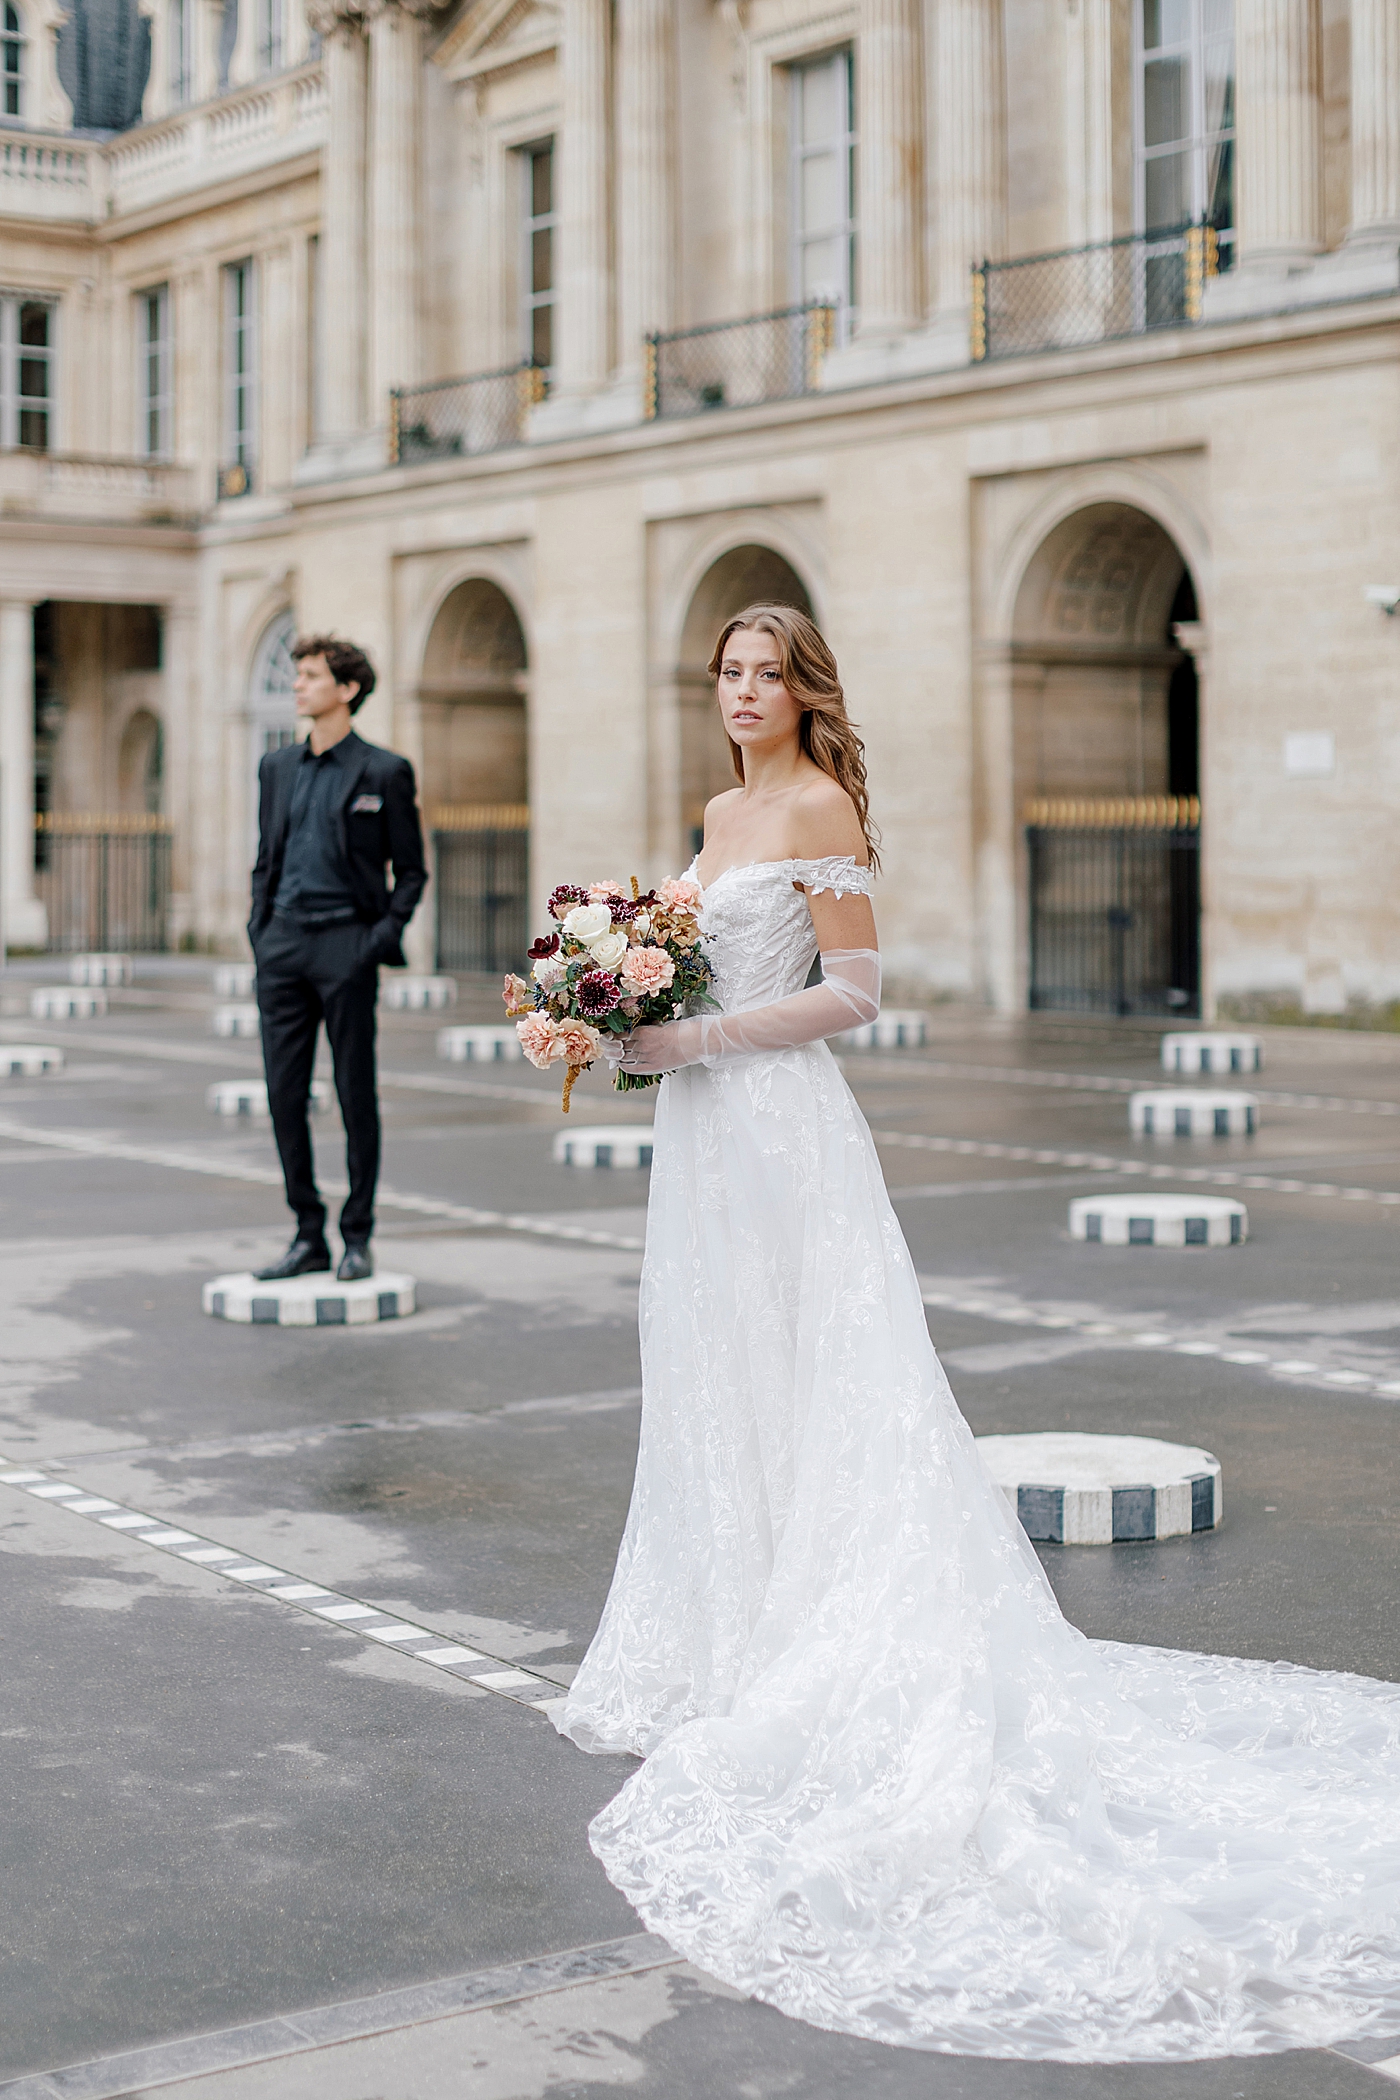 Bride and groom standing separately while looking at the camera with a European chateau in the background | Image by Hope Helmuth Photography